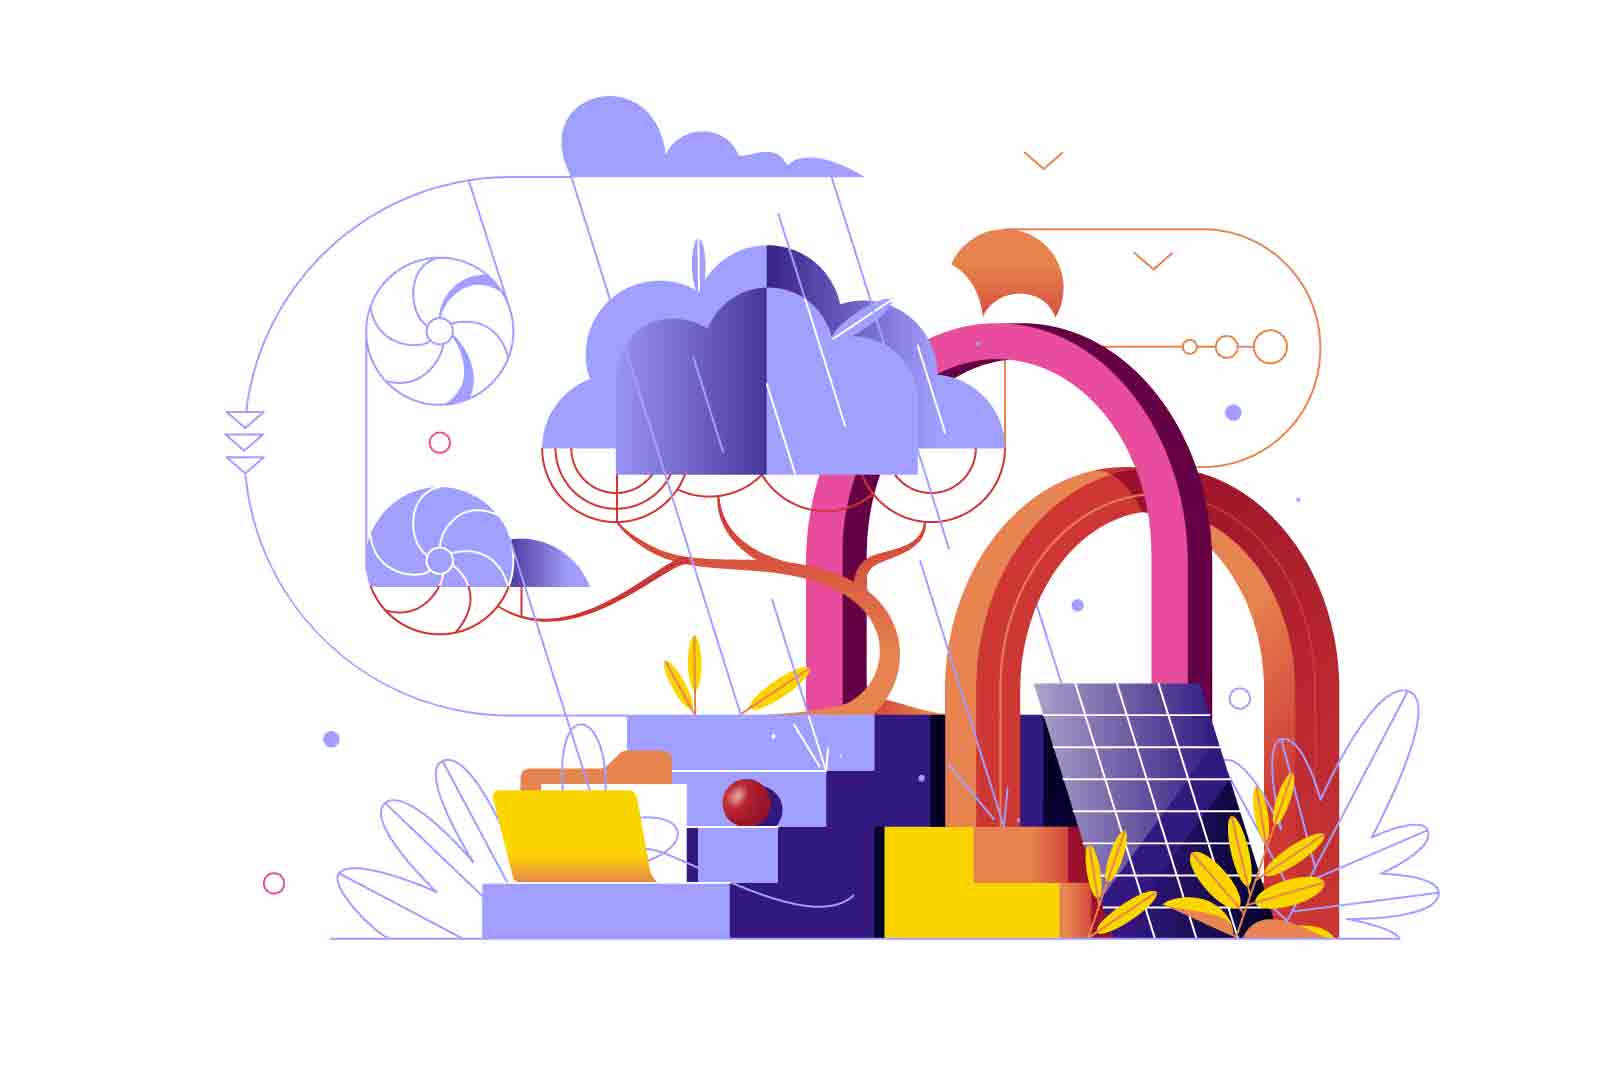 Abstraction with geometric figures vector illustration. Arches, stairs, tree and clouds composition flat style concept